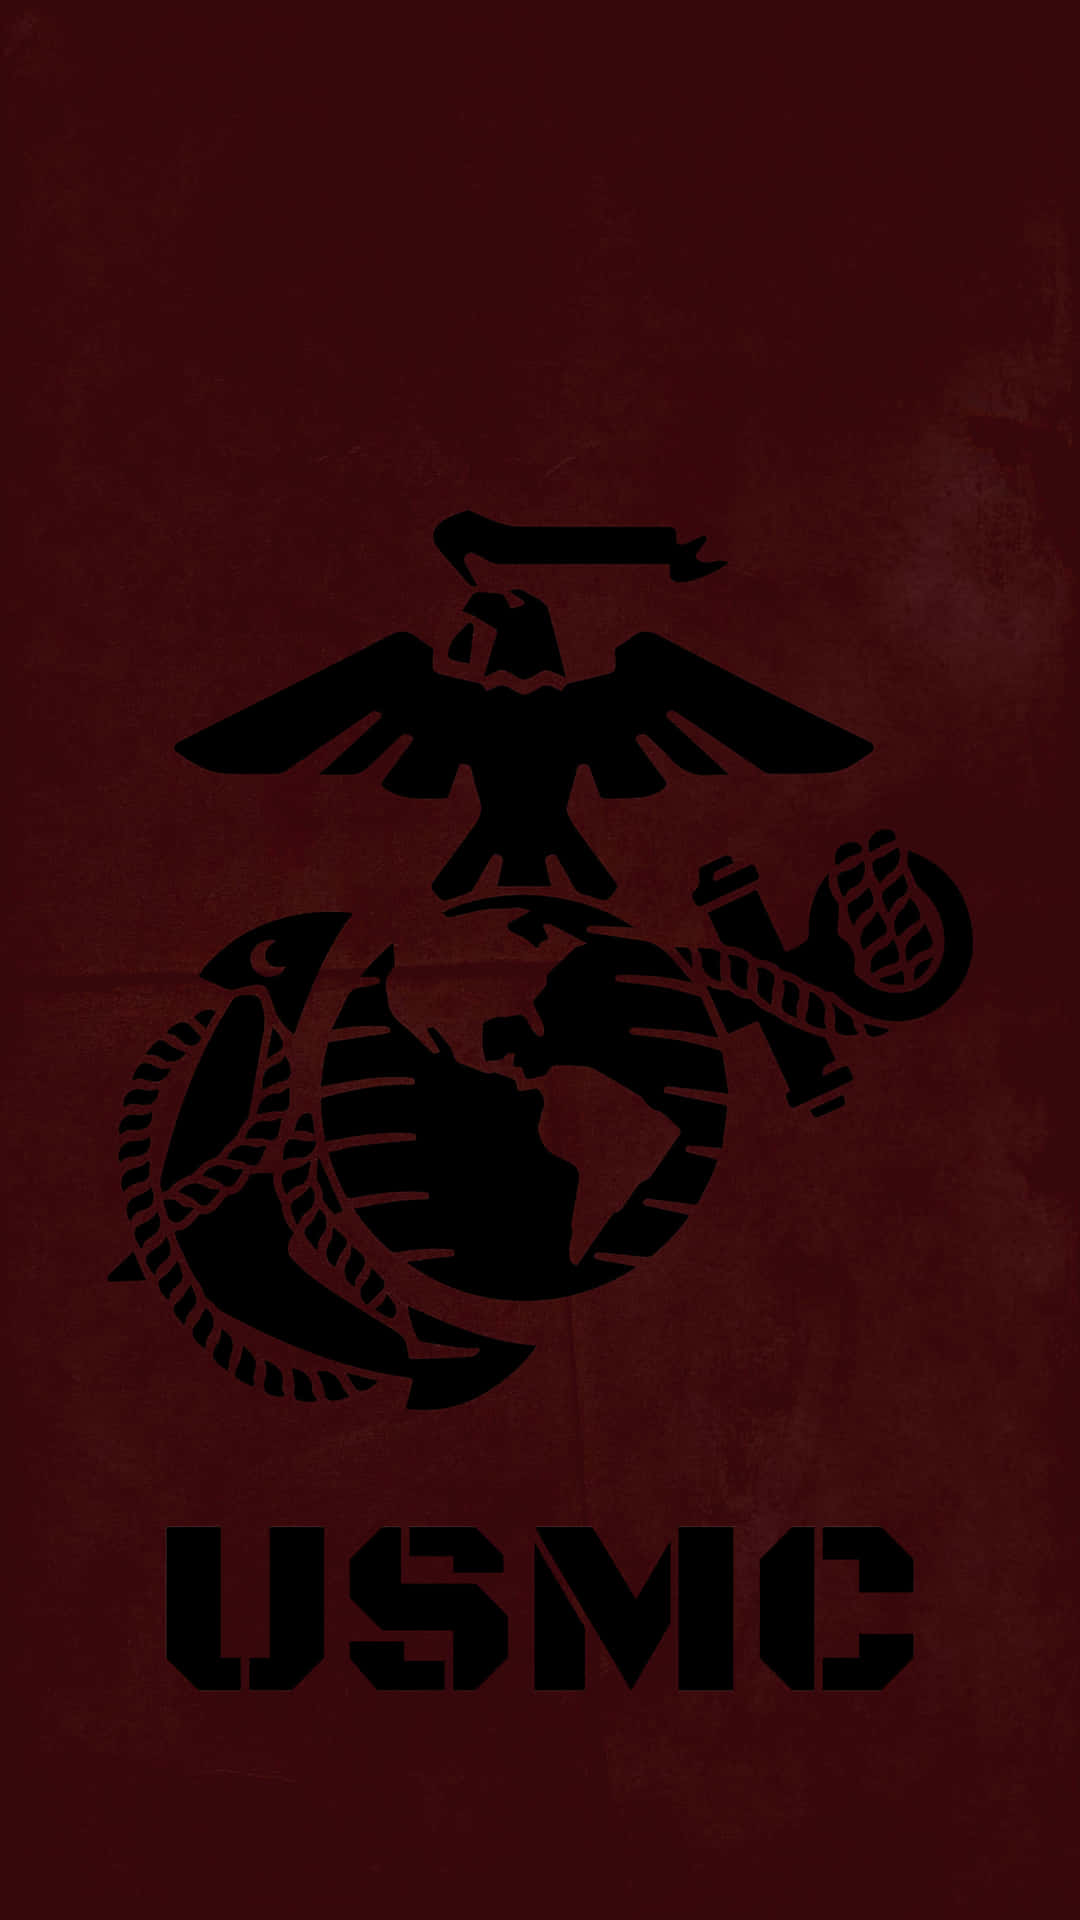 Proudly display your affiliation with the USMC with this vibrant logo Wallpaper